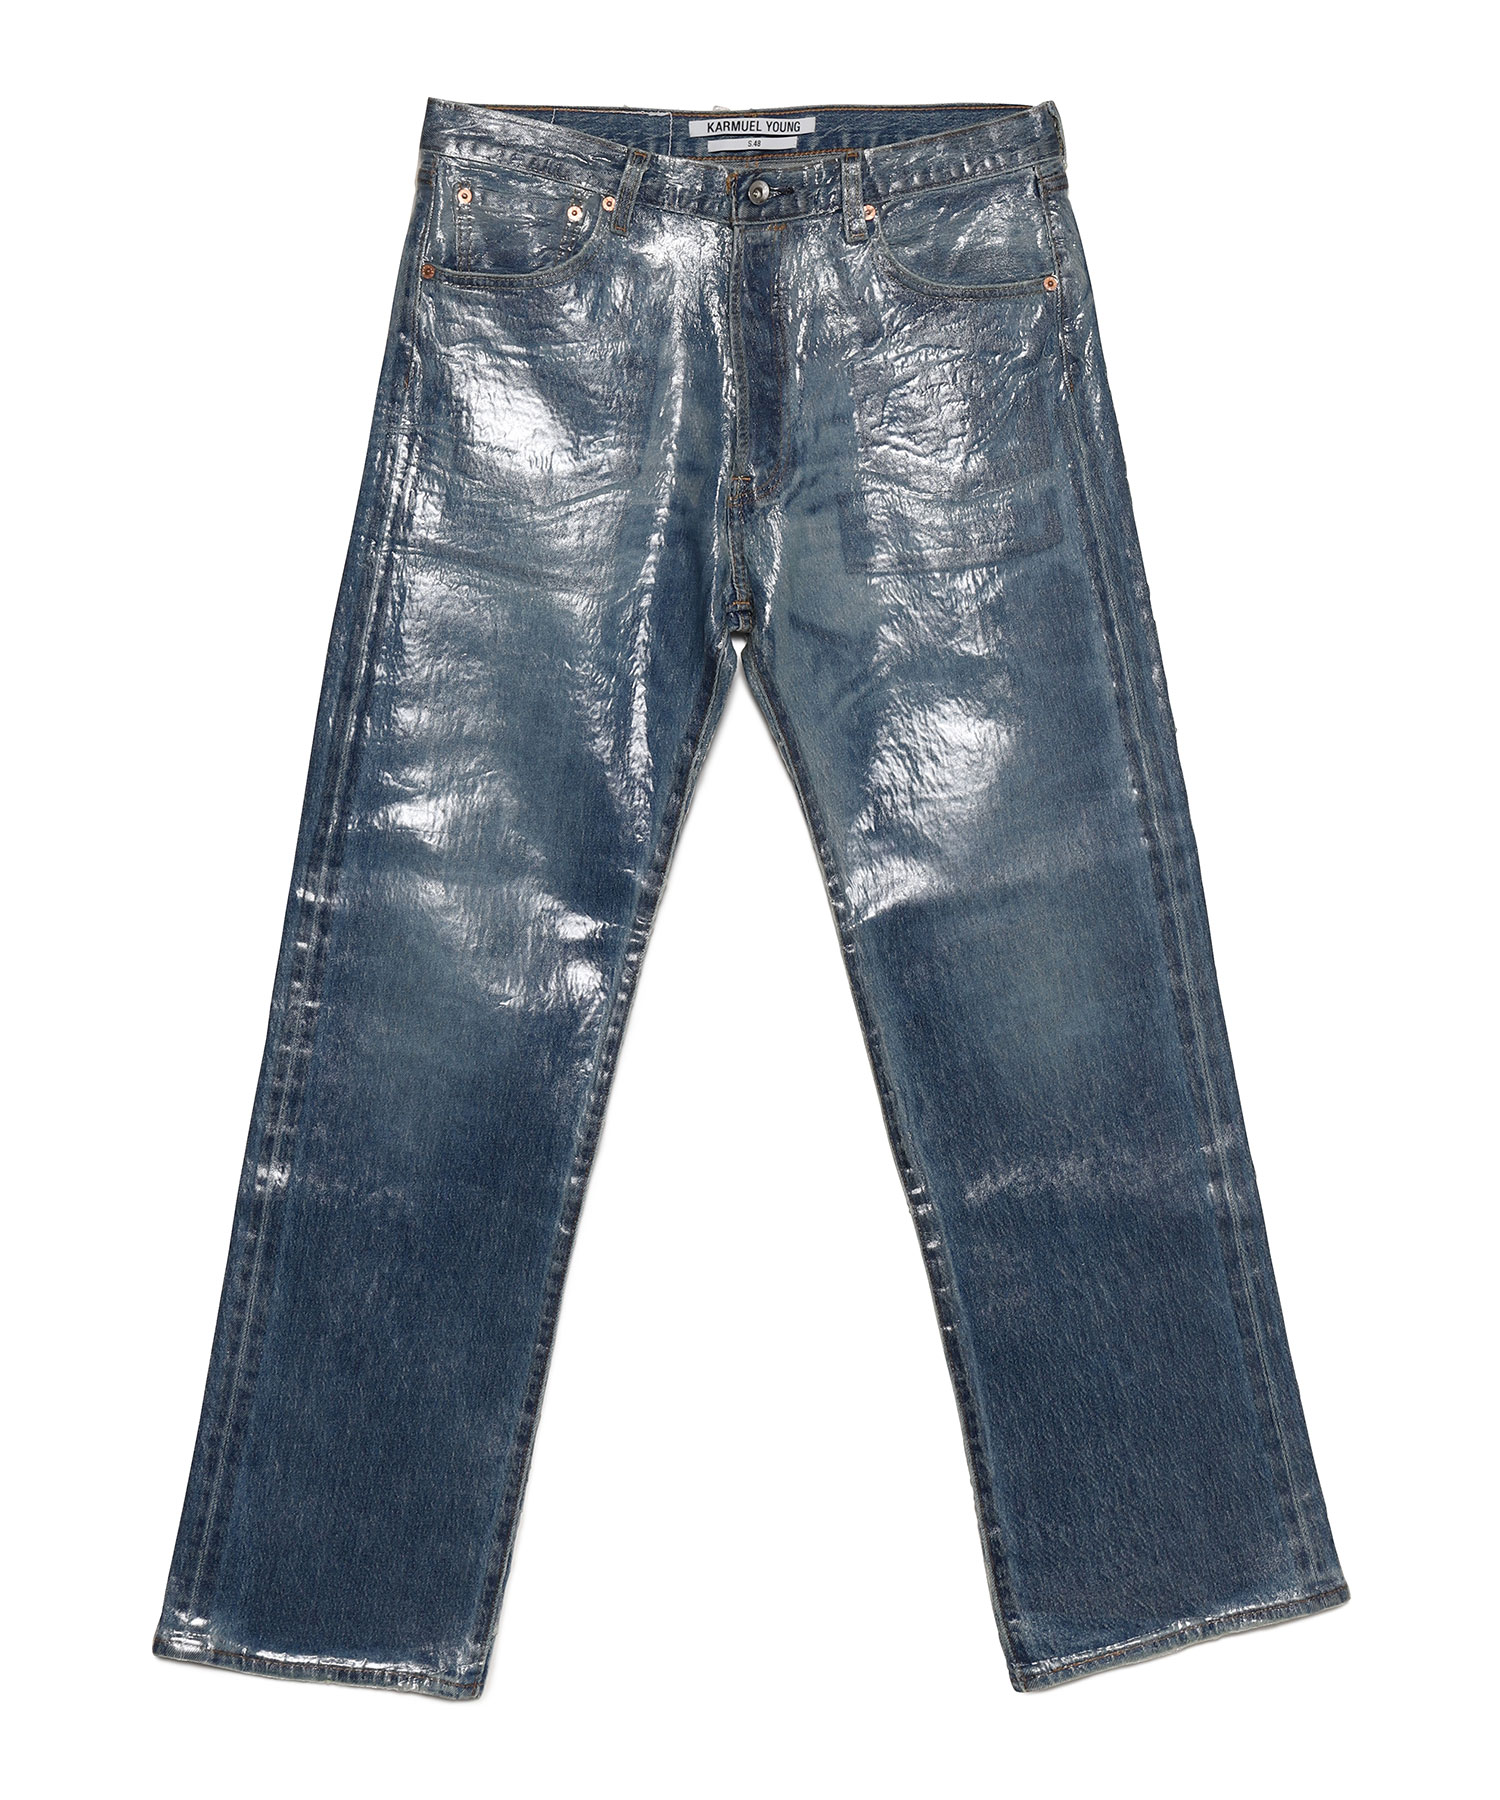 RE-edited overprinted Levi's 501 Jeans（KARMUEL YOUNG 